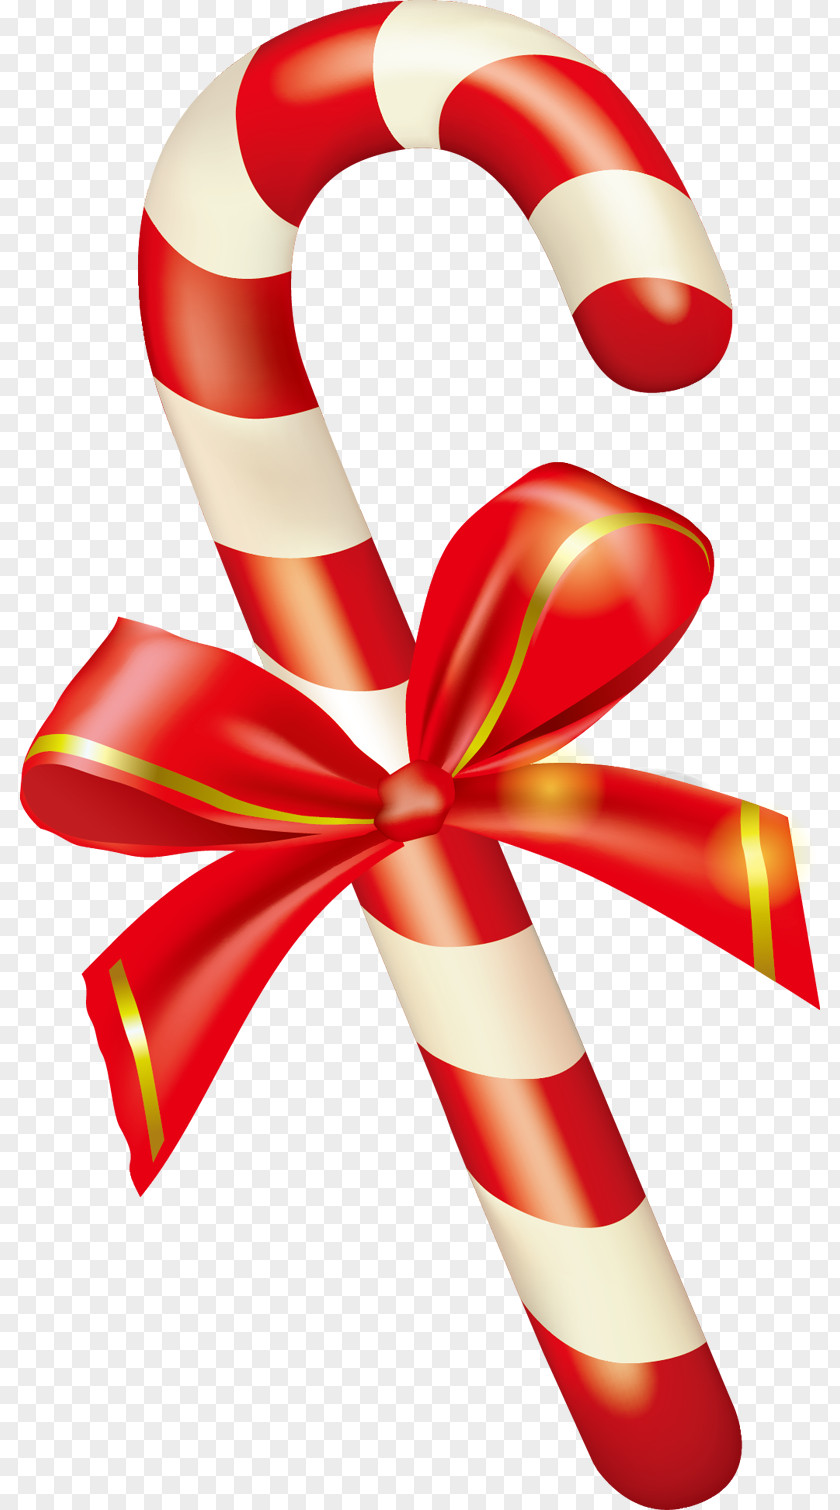 Painted Red Christmas Candy Cane Clip Art PNG